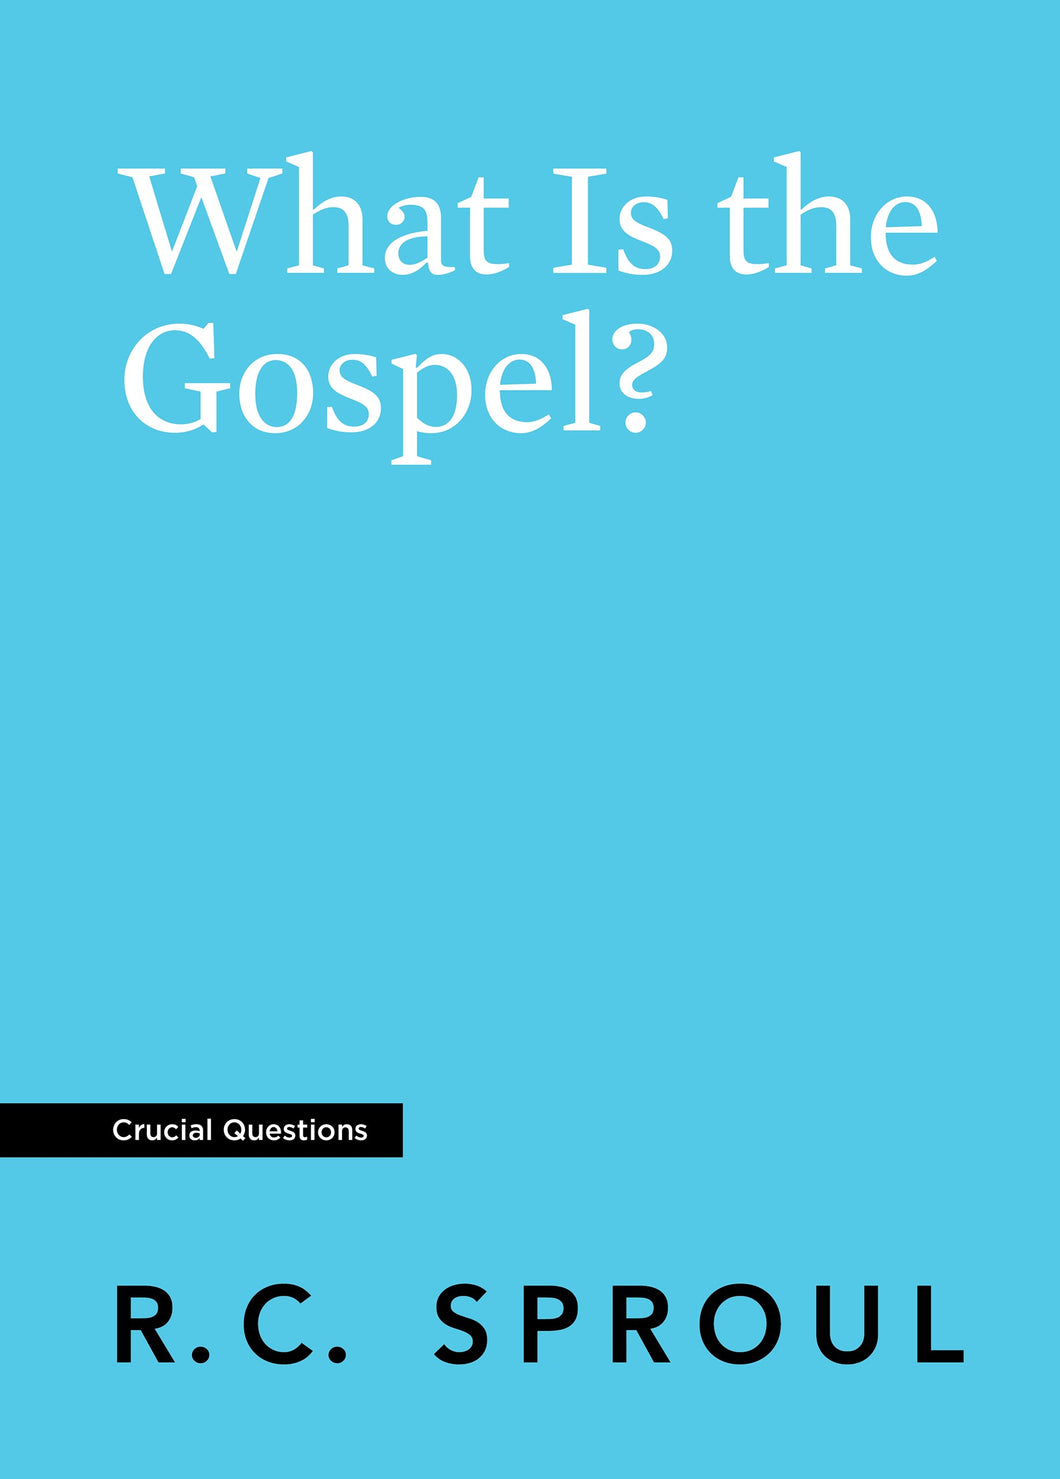 What Is The Gospel? (Crucial Questions)